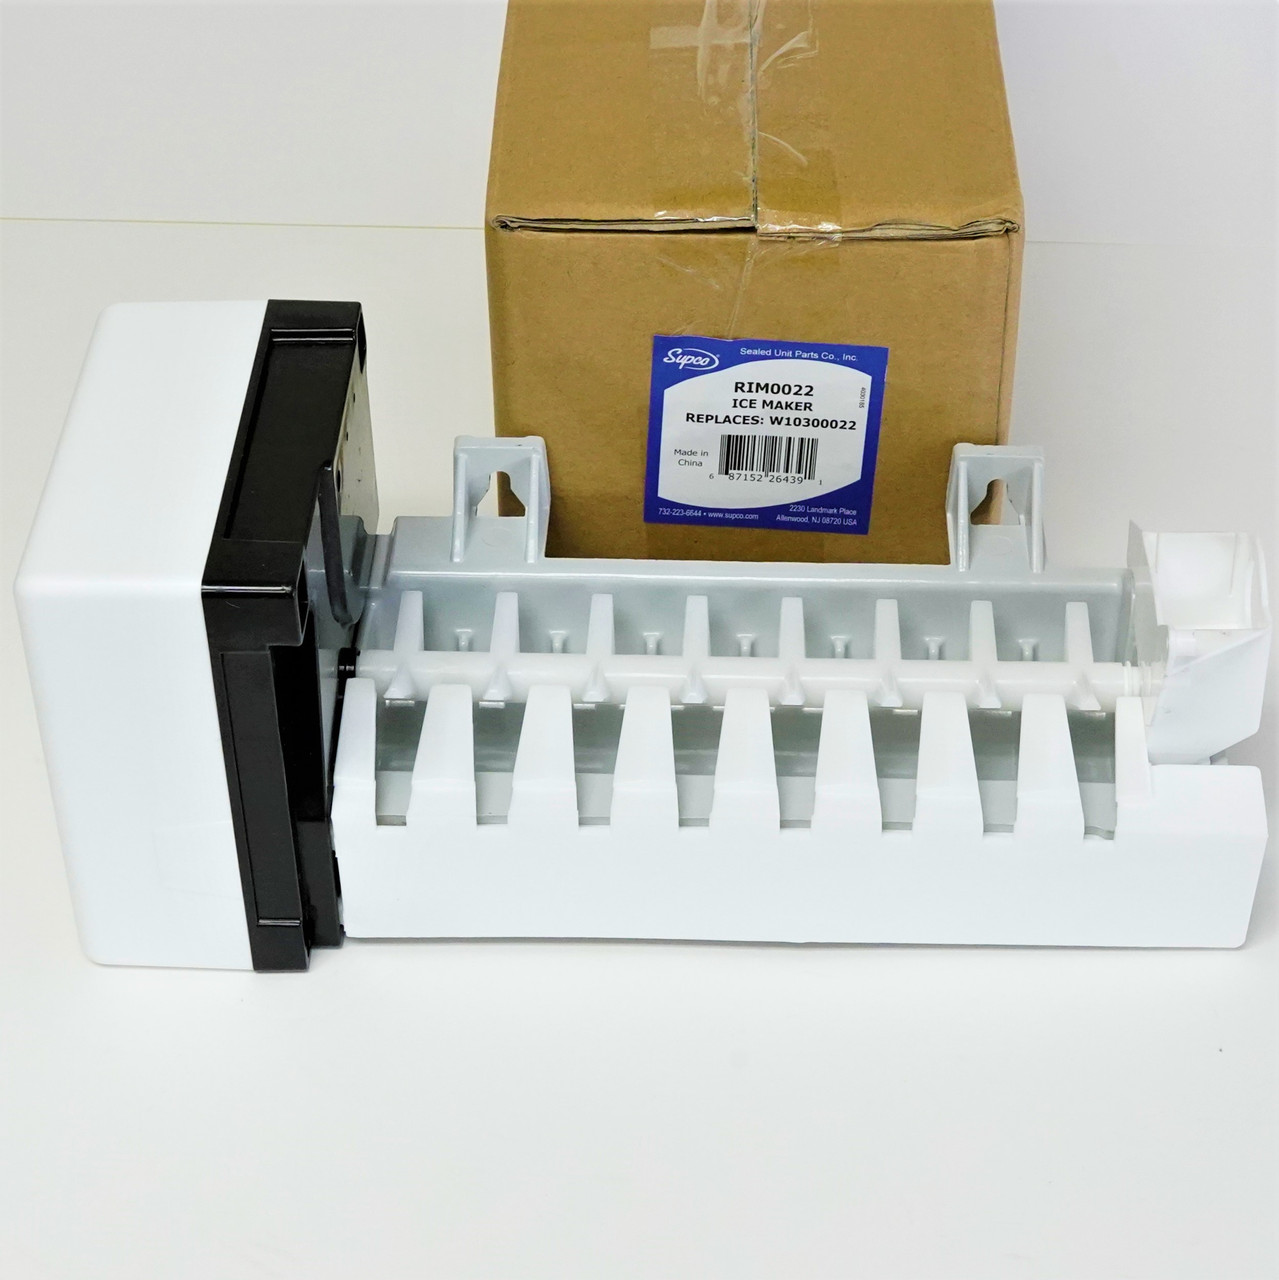 Supco Replacement Icemaker for Whirlpool, McCombs Supply Co